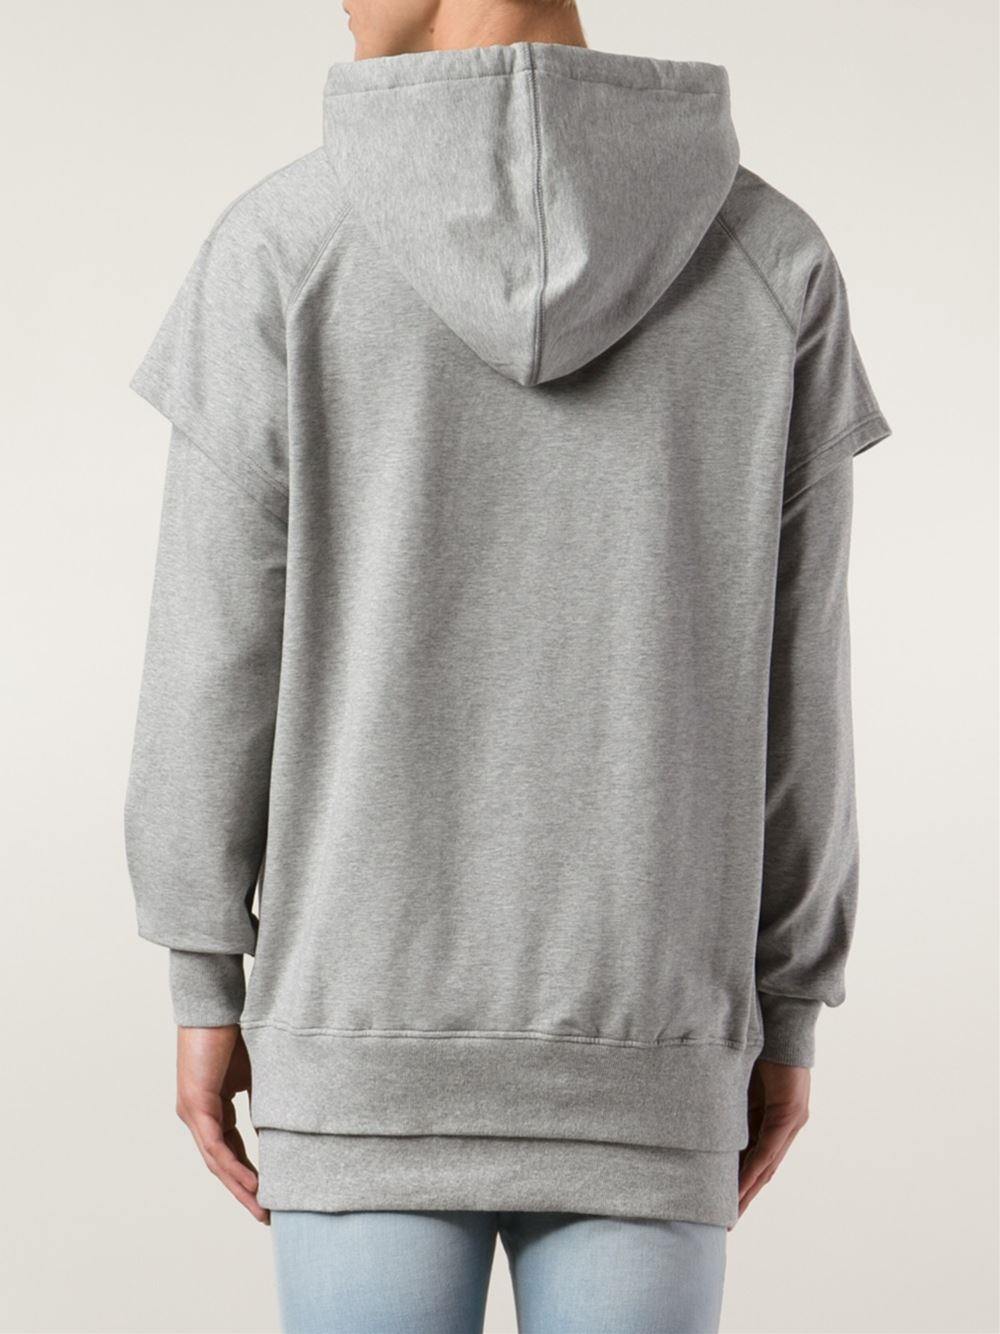 Lyst - Stampd Oversized Hoodie in Gray for Men